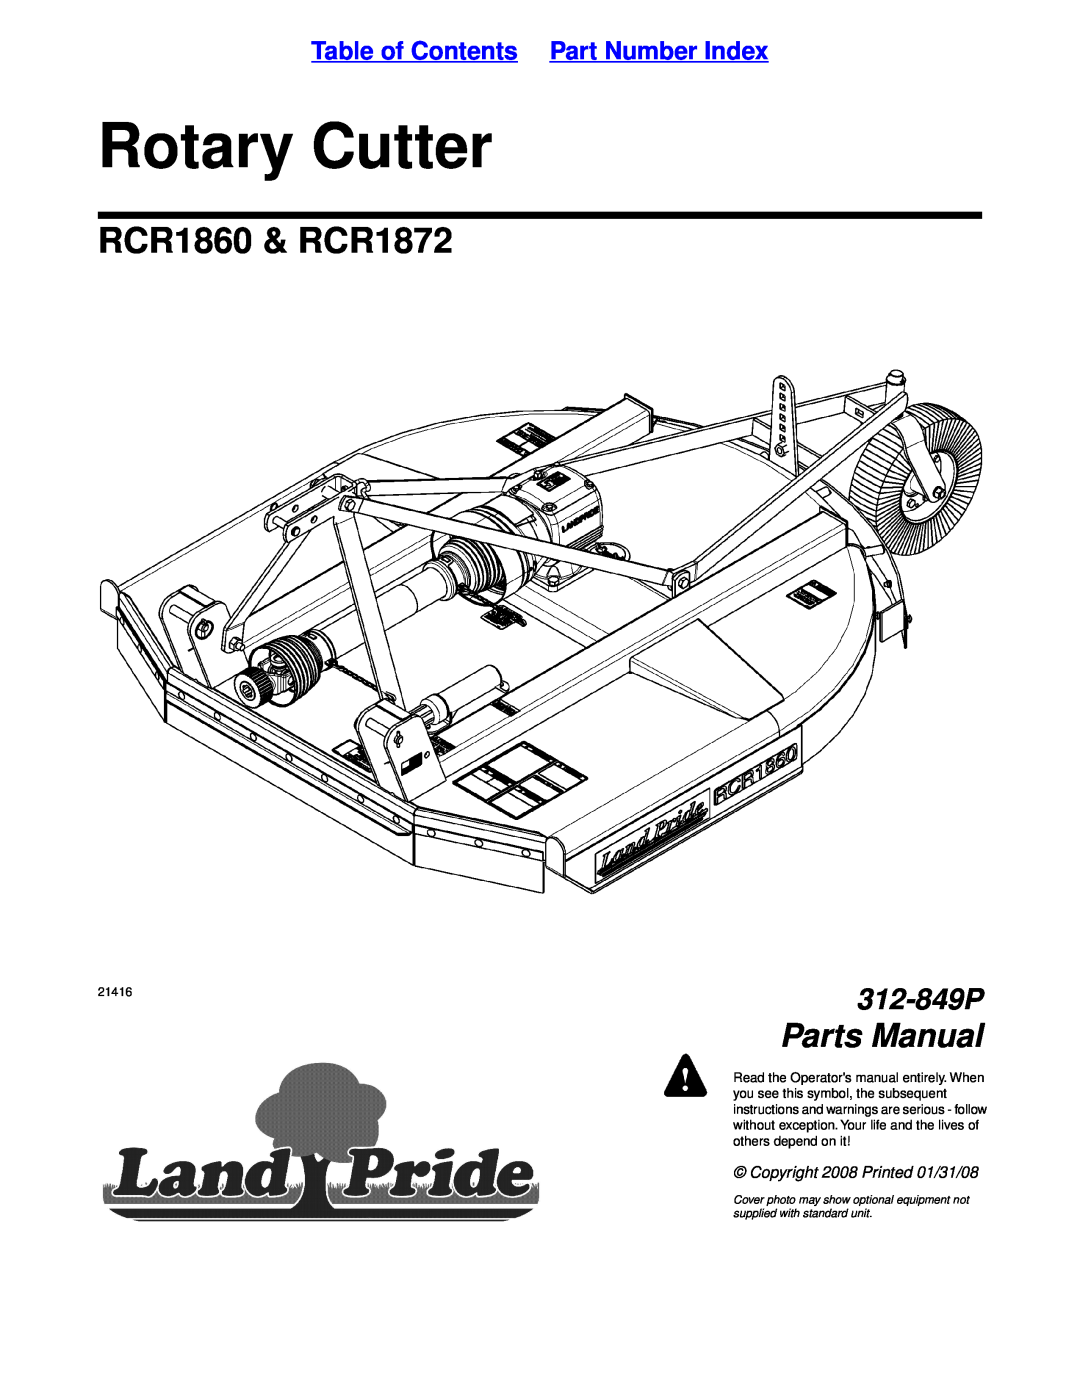 Land Pride manual Table of Contents Part Number Index, Rotary Cutter, RCR1860 & RCR1872, Parts Manual, 312-849P 